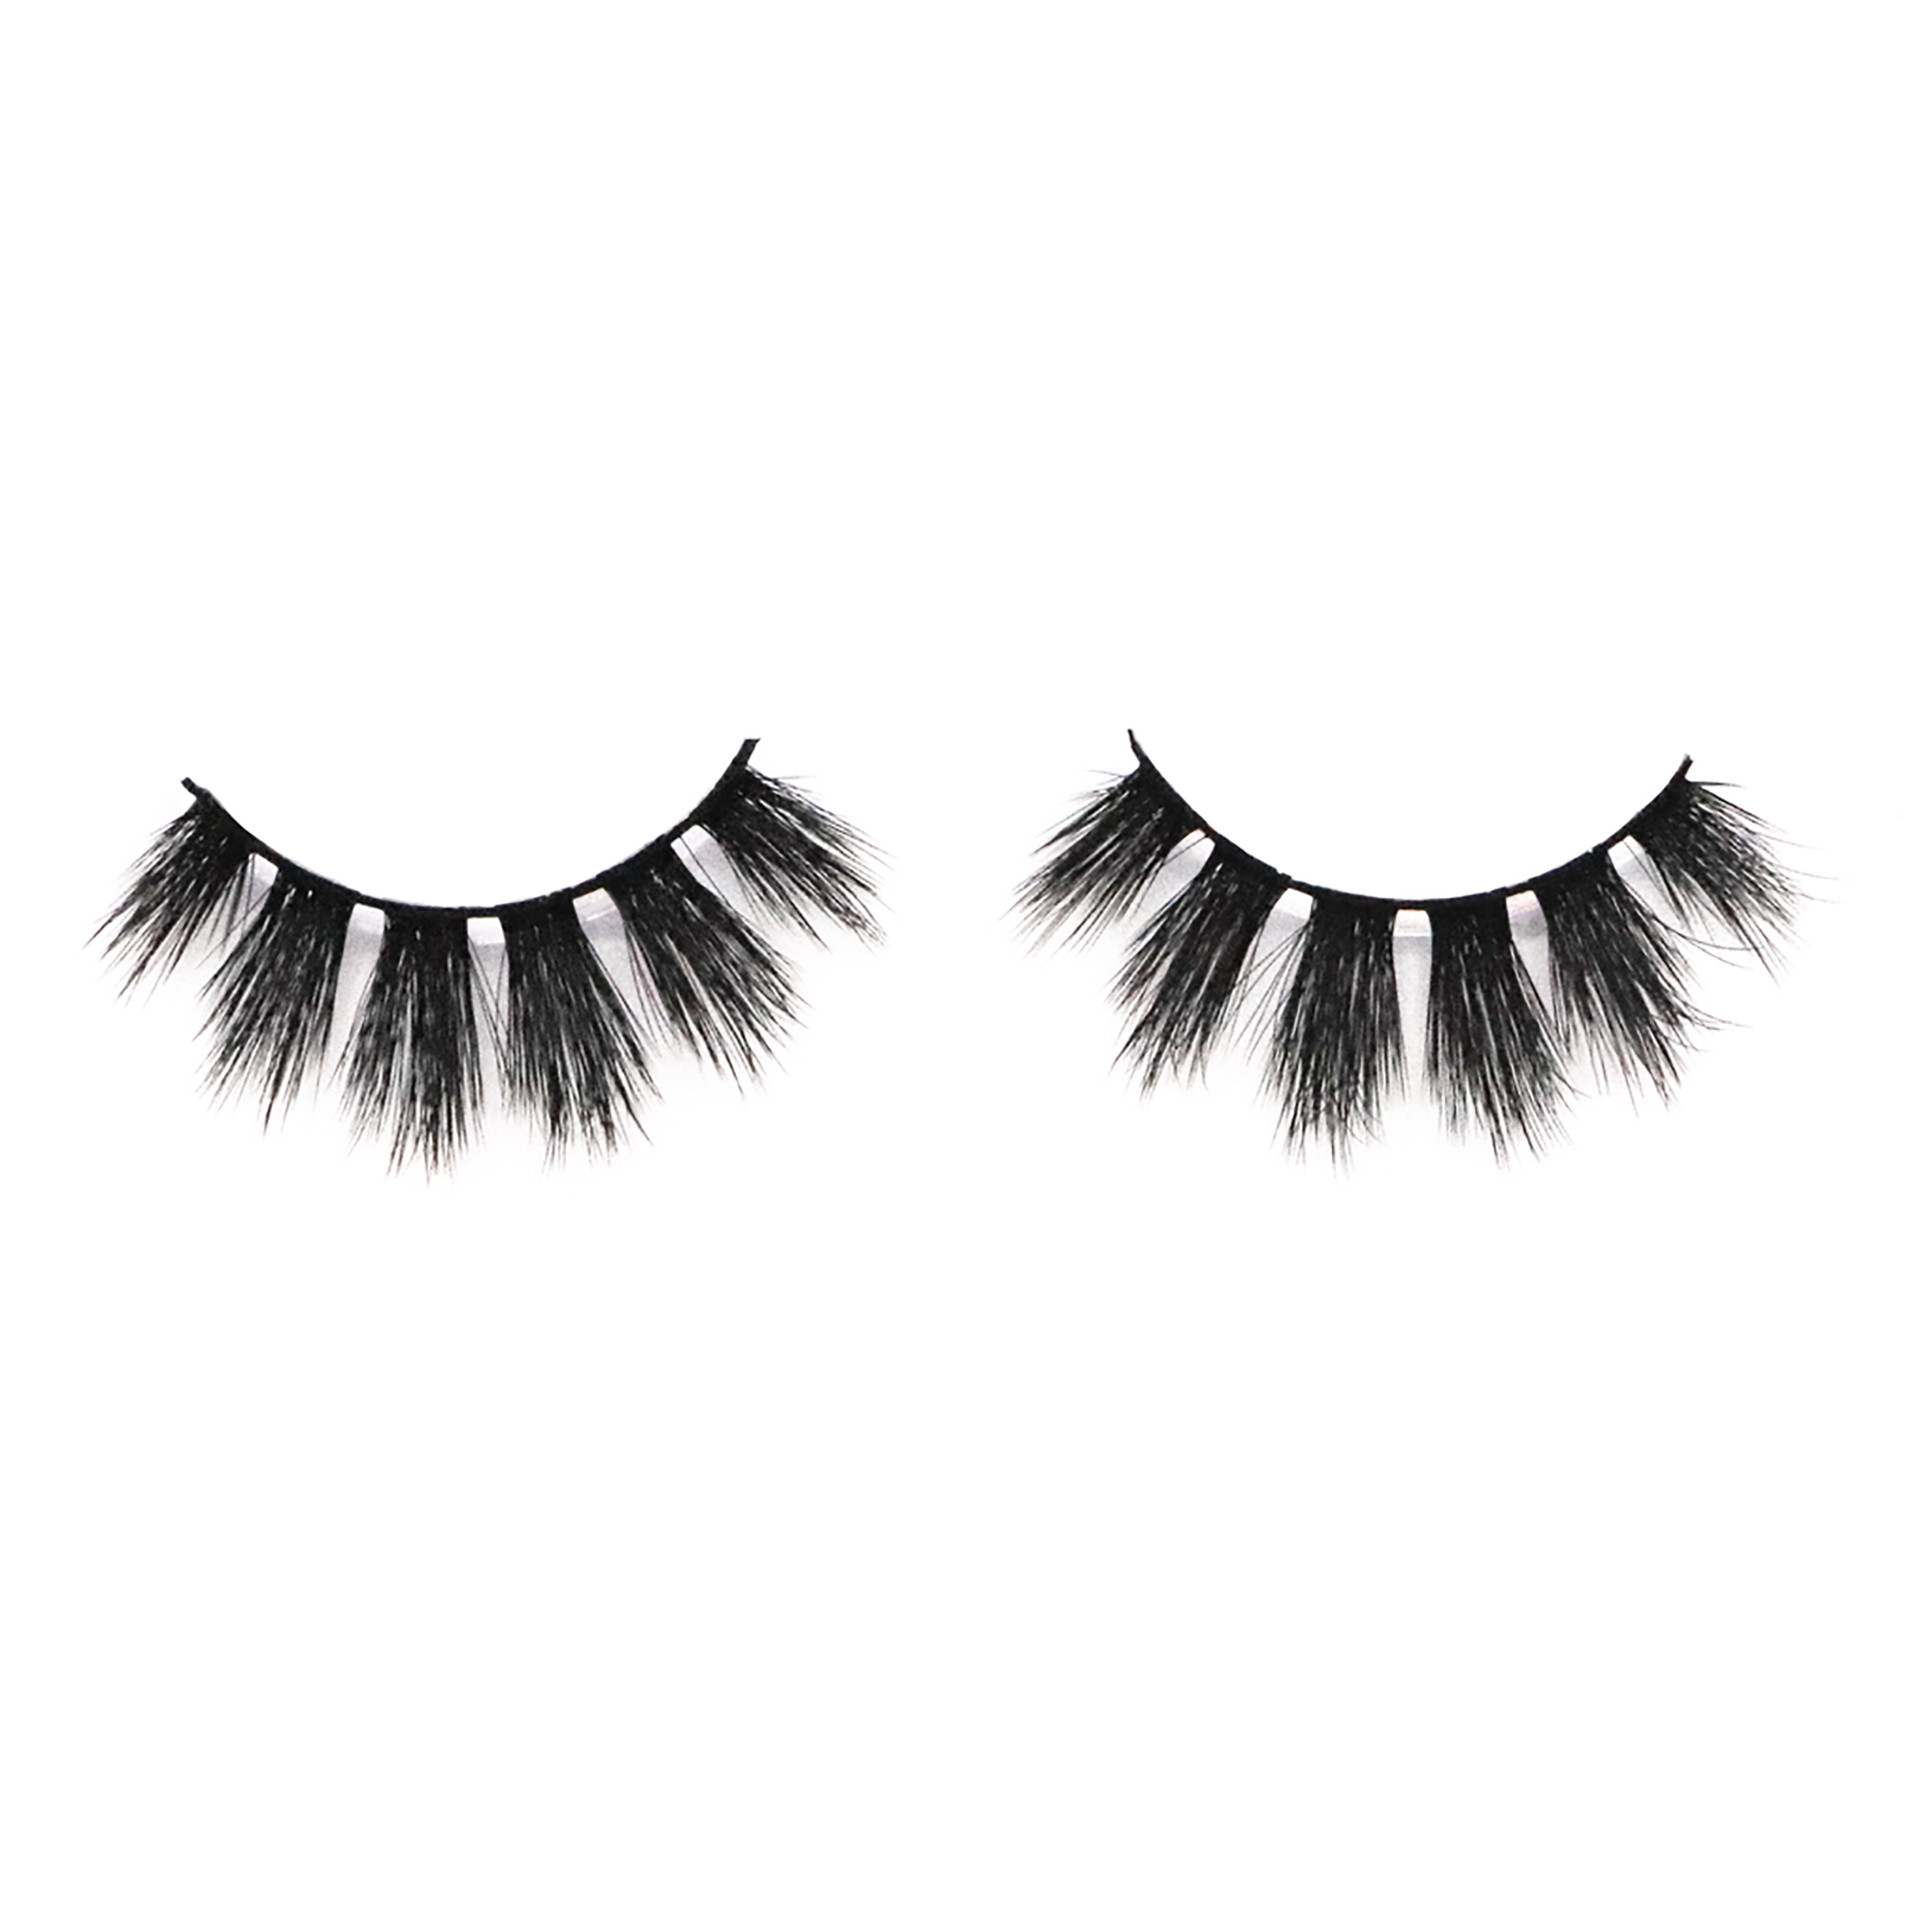 The Makeup Shack Lashes / IVY